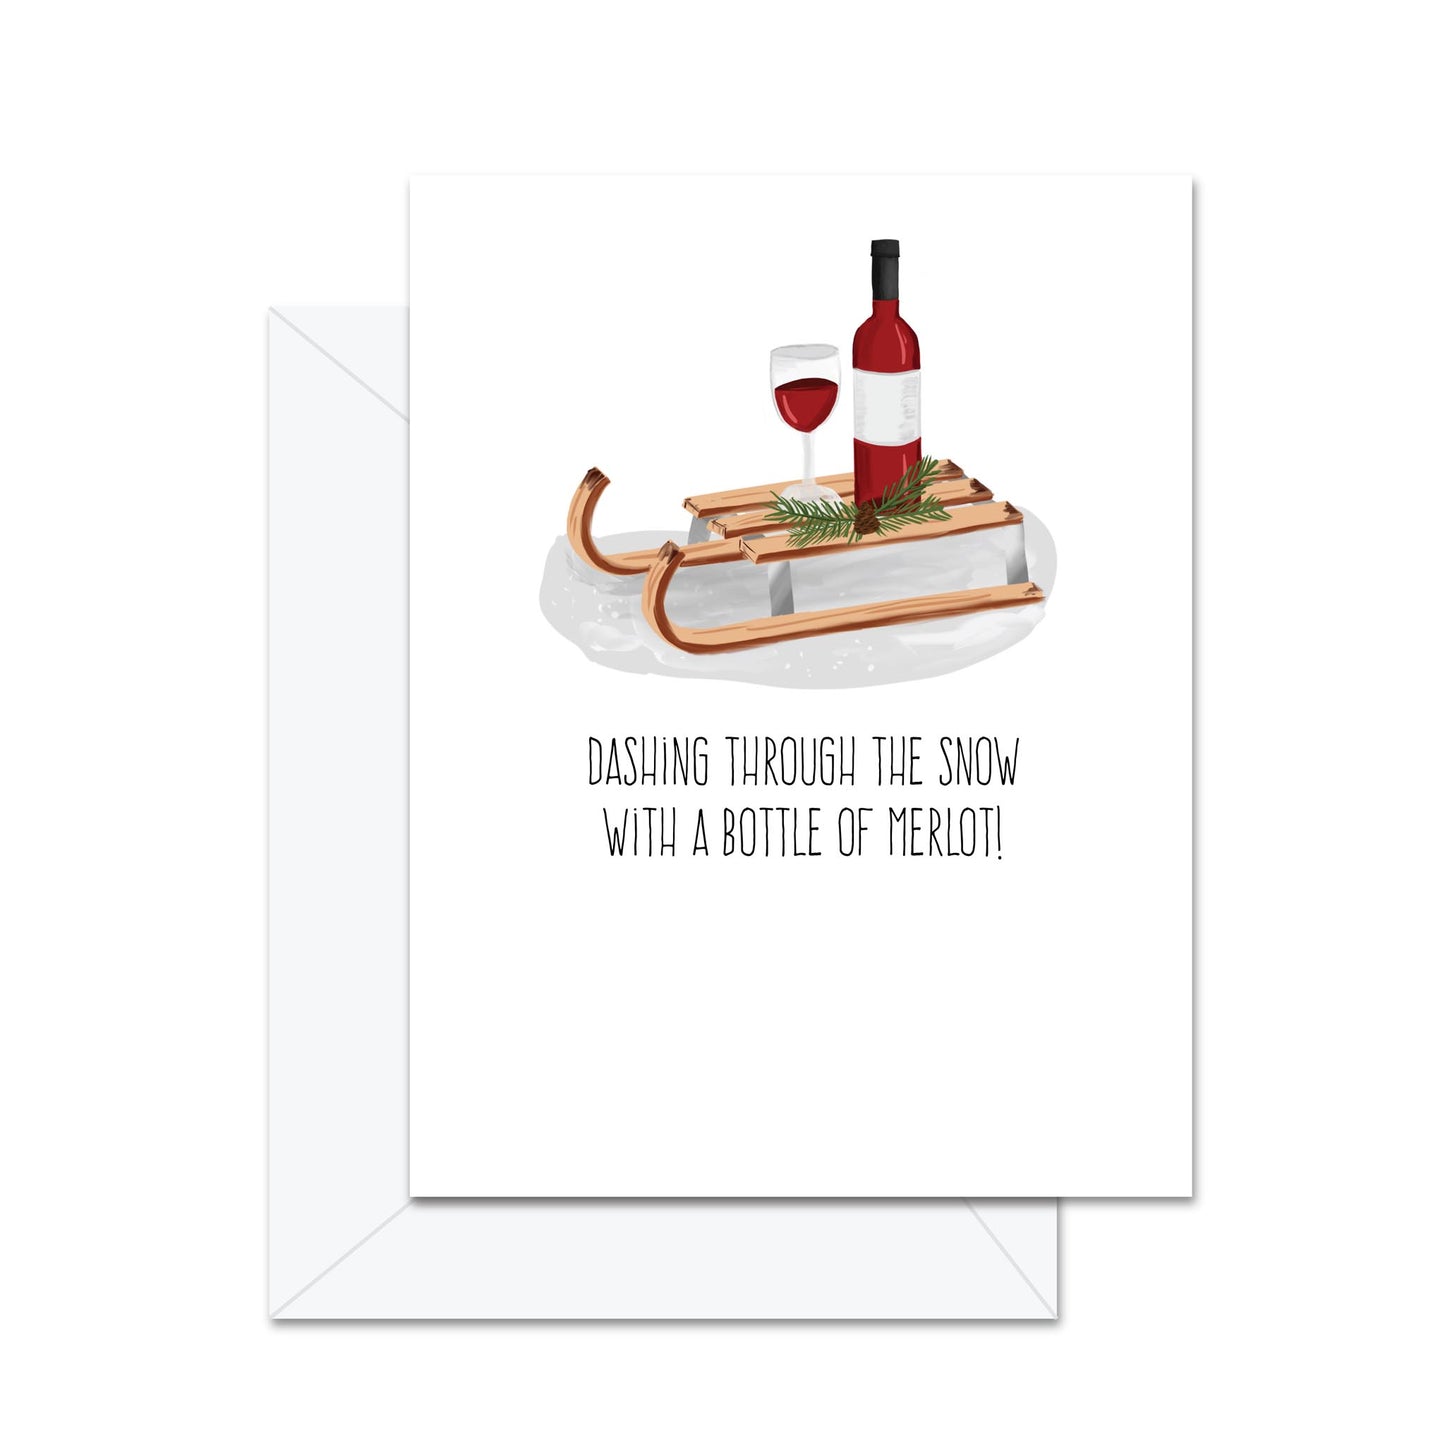 Dashing Through The Snow With A Bottle Of Merlot - Greeting Card